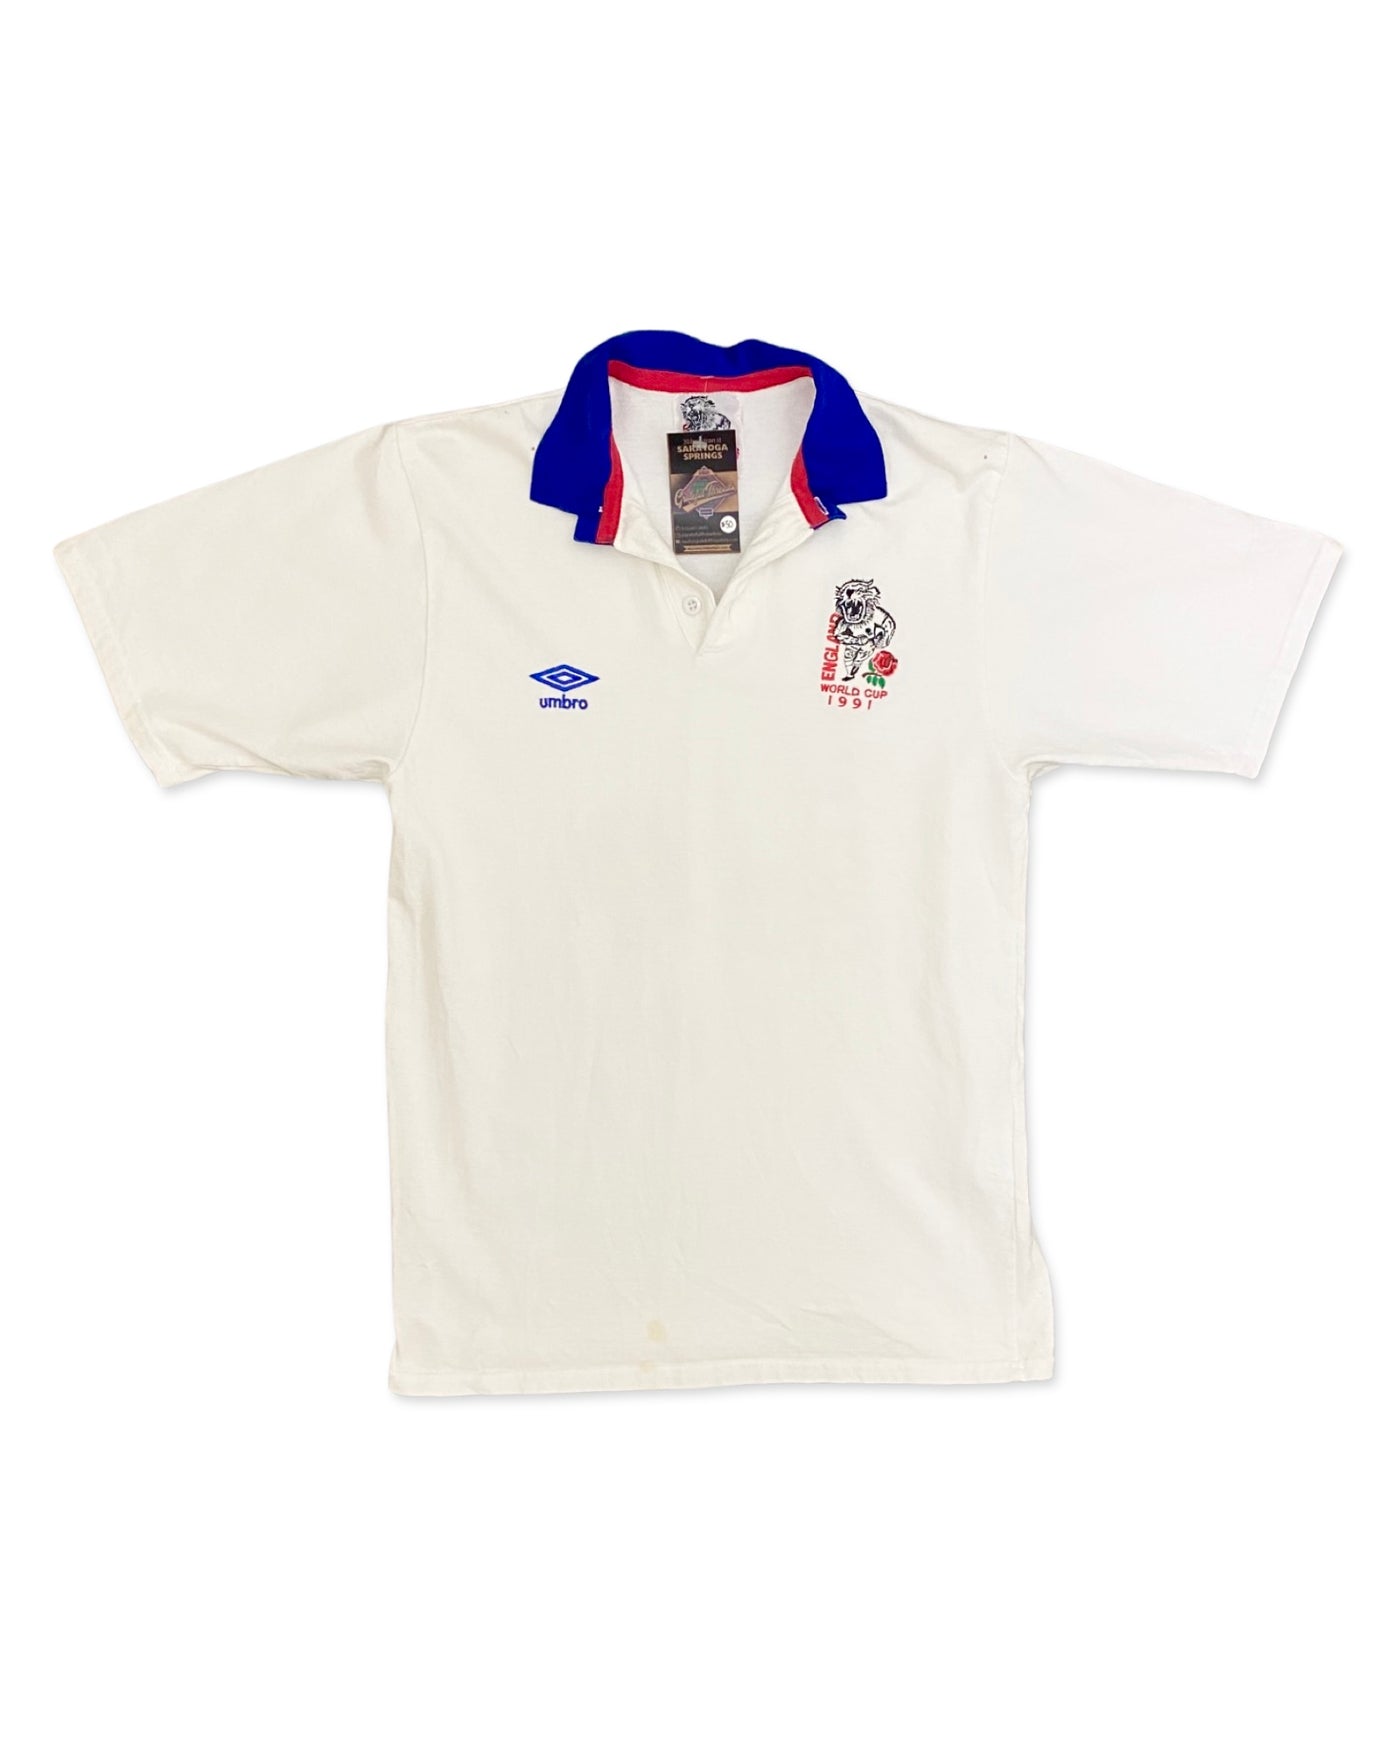 Vintage 1991 England Rugby World Cup Polo